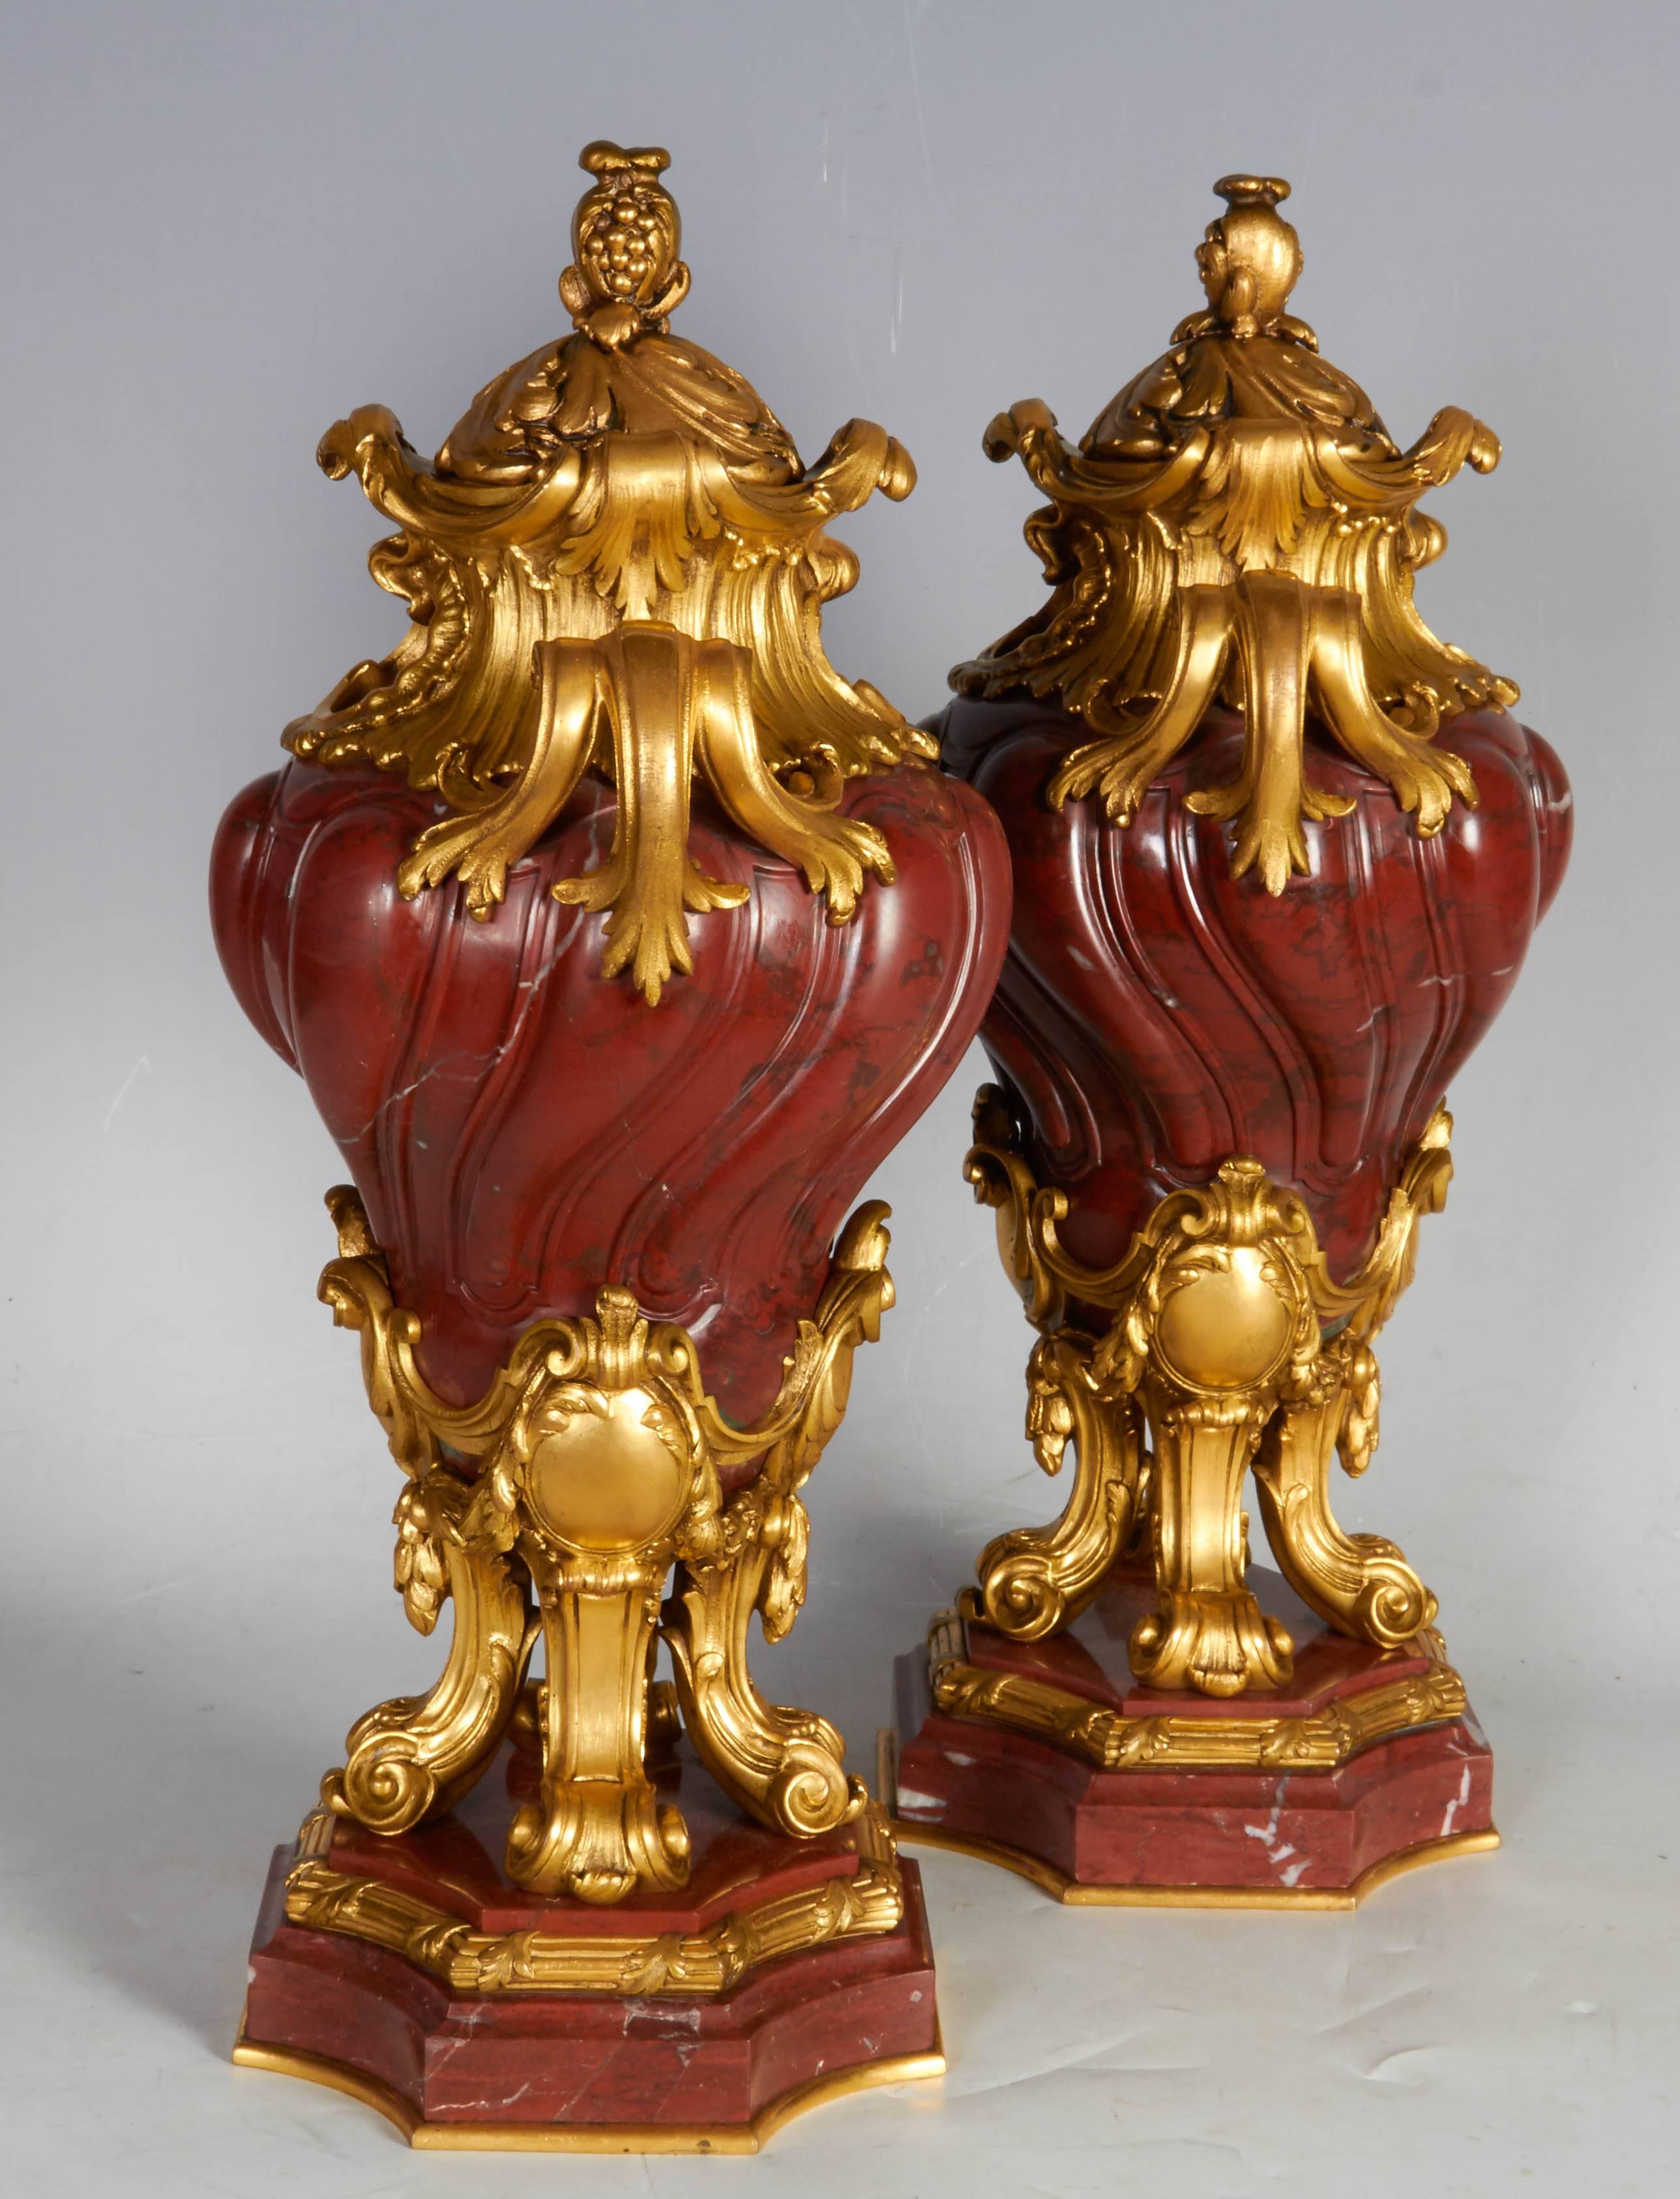 A pair of antique French transitional ormolu-mounted rouge griotte marble covered vases or urns
Last quarter of the 19th century attributed to Henry Dasson
Each with domed lid with a pinecone final, the foliage scroll handles above the spiral